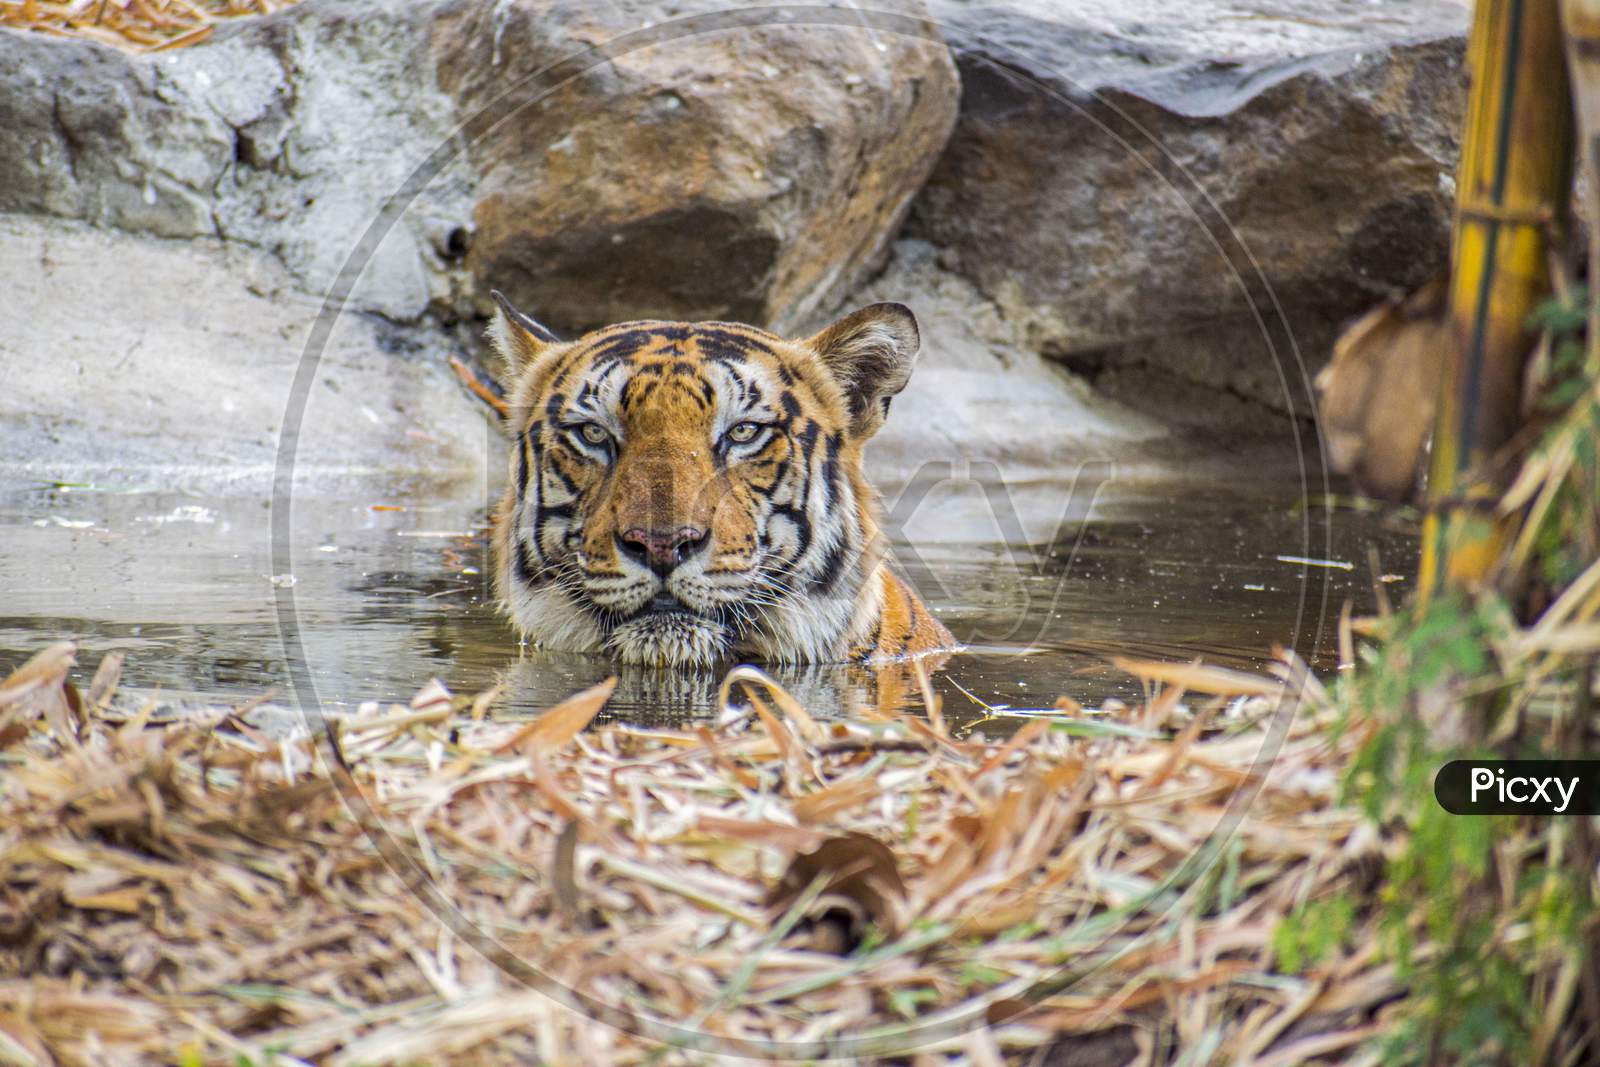 A Royal Bengal Tiger Sitting And Resting In A Water Pool Seeing Towards The Camera In A Forest In India During Indian Summers.